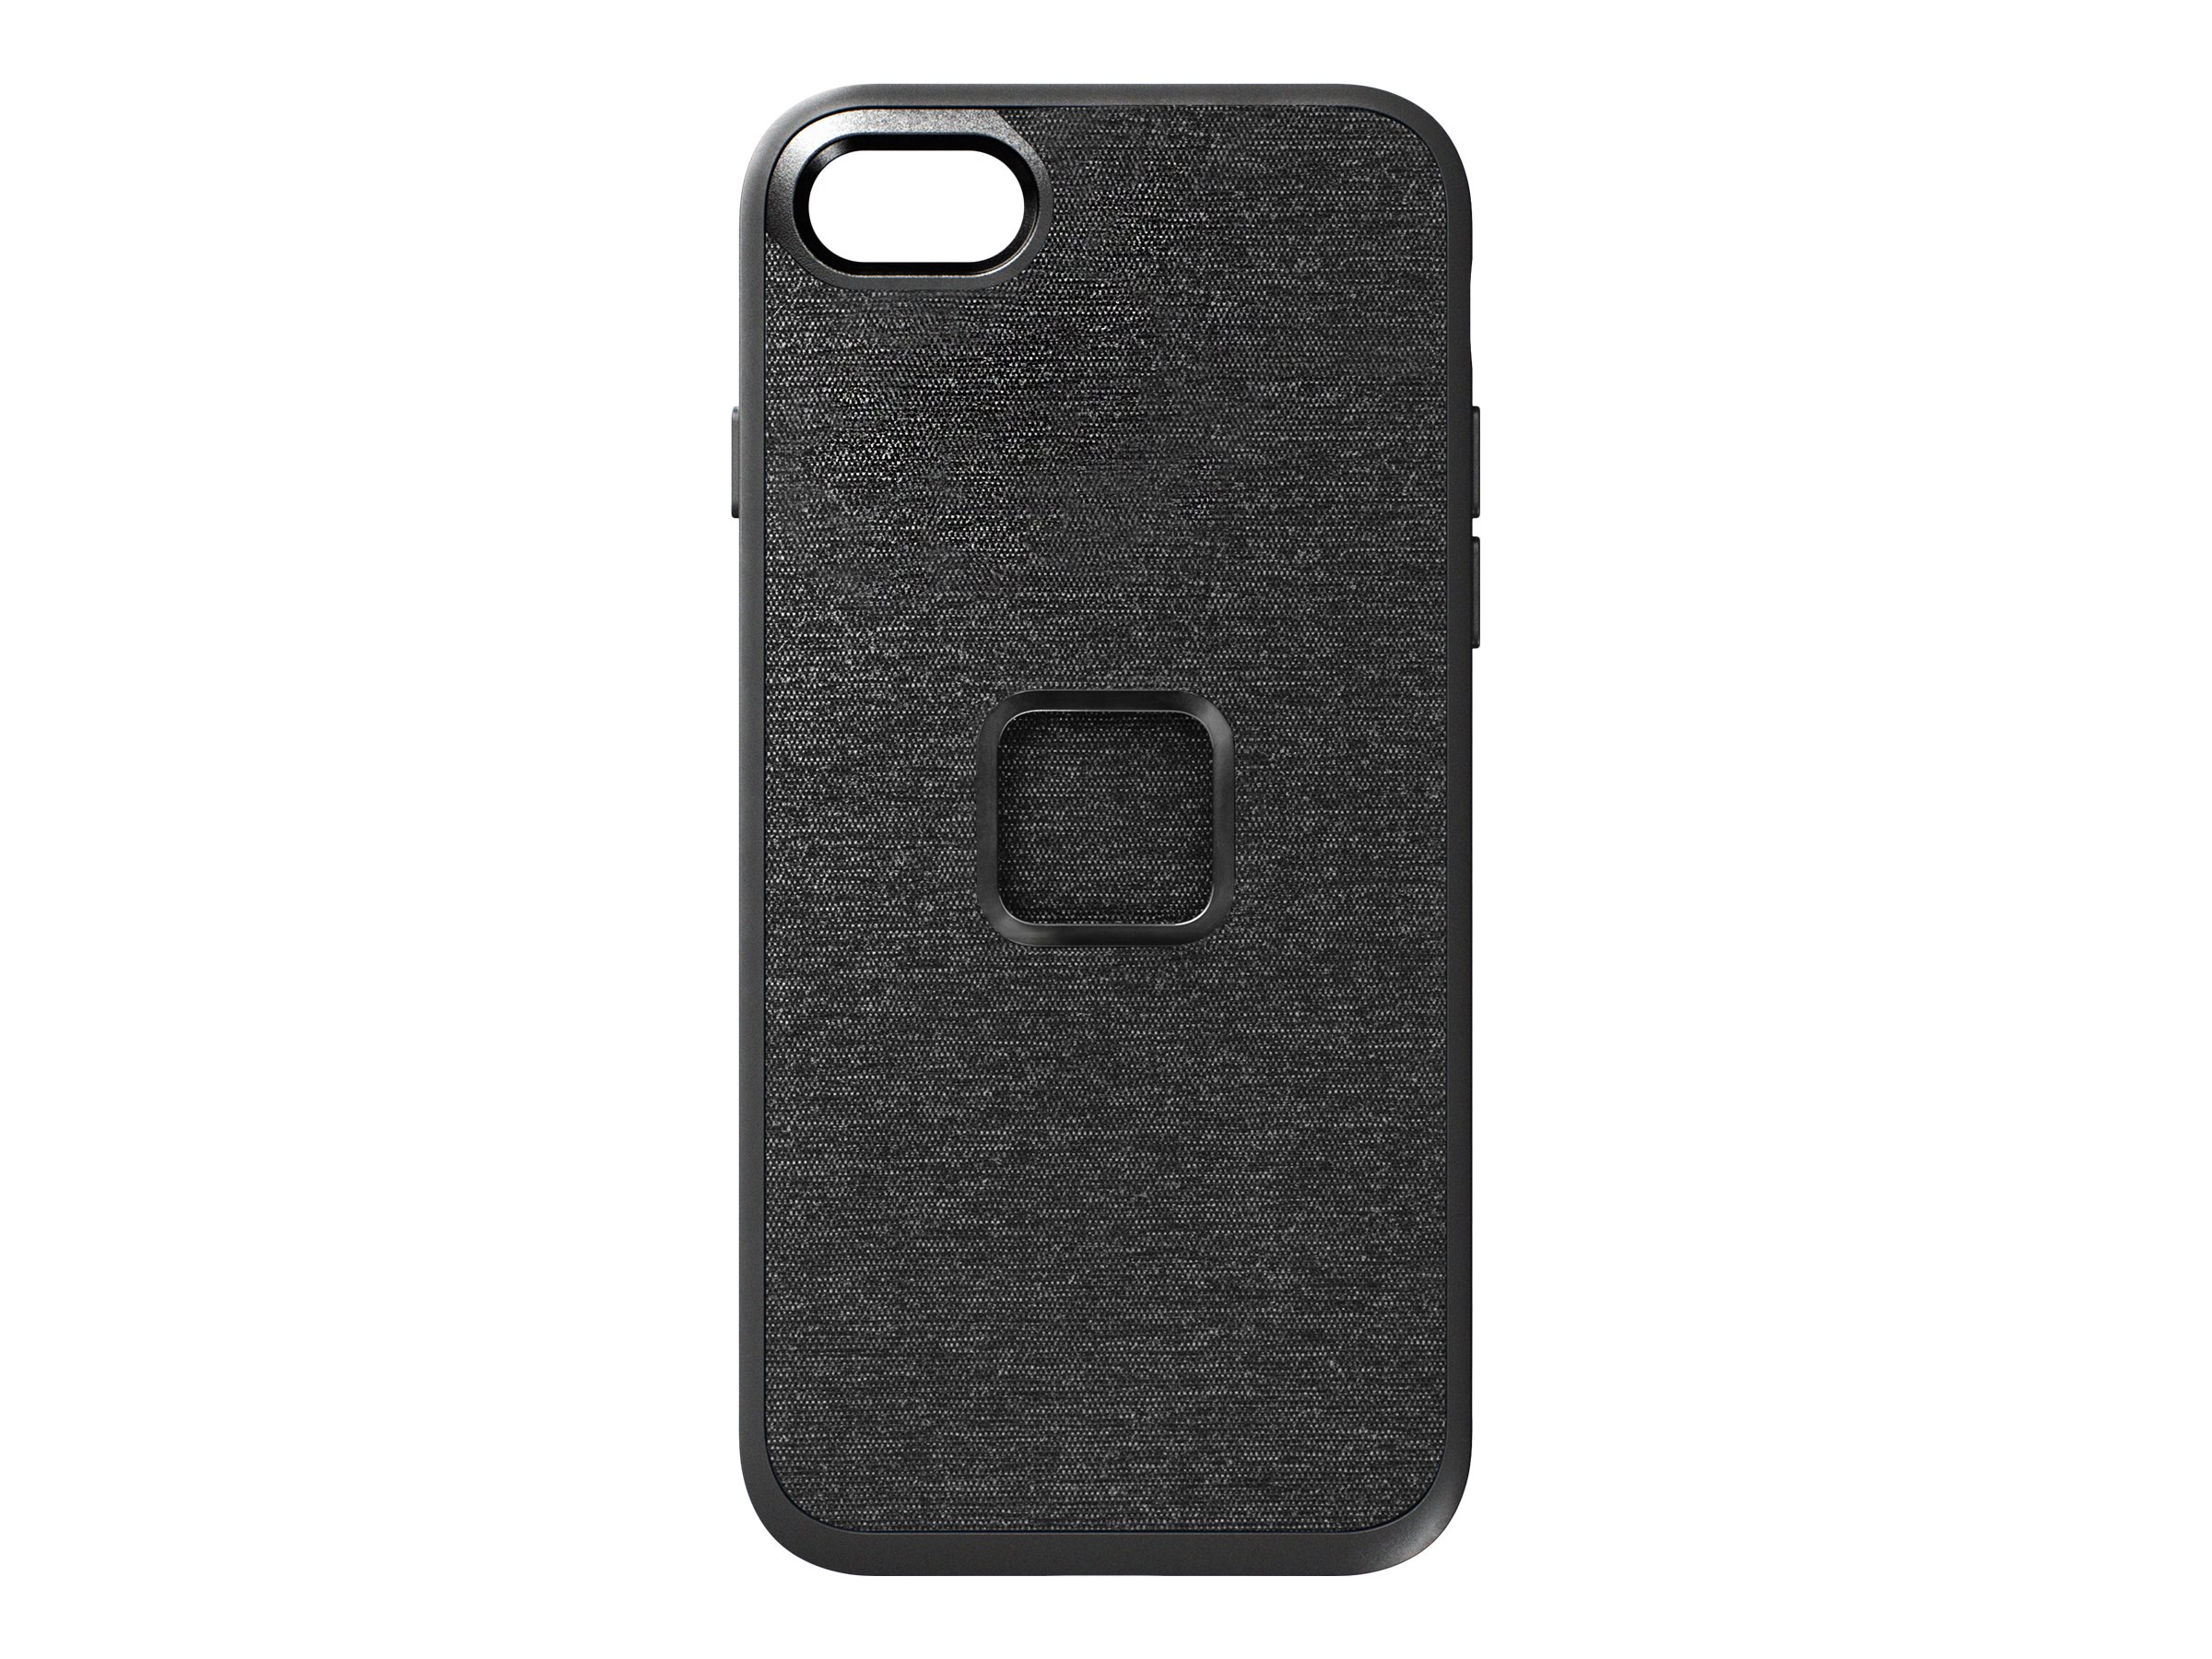 Peak Design Everyday Case for iPhone SE - Charcoal